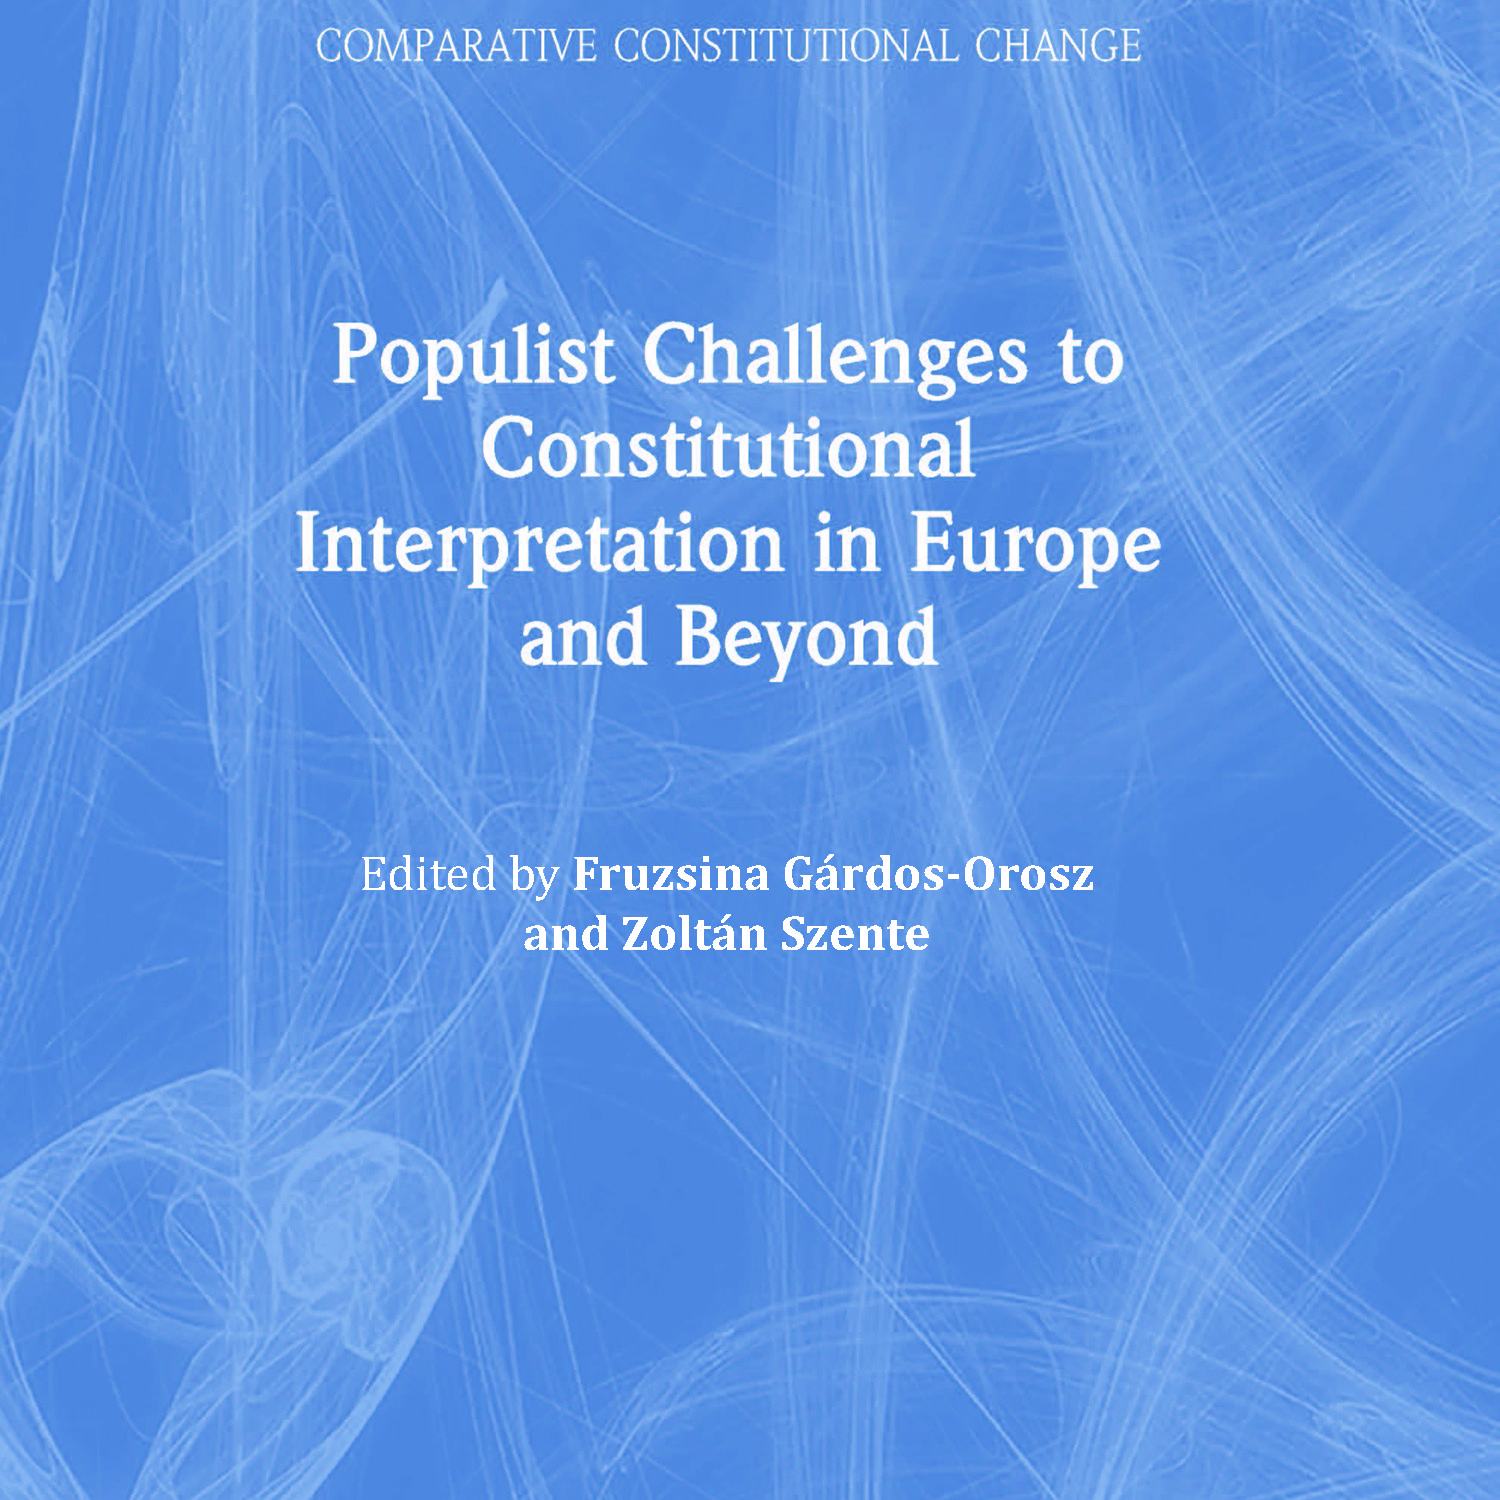 Just published – Formalism and Judicial Self-Restraint as Tools Against Populism?